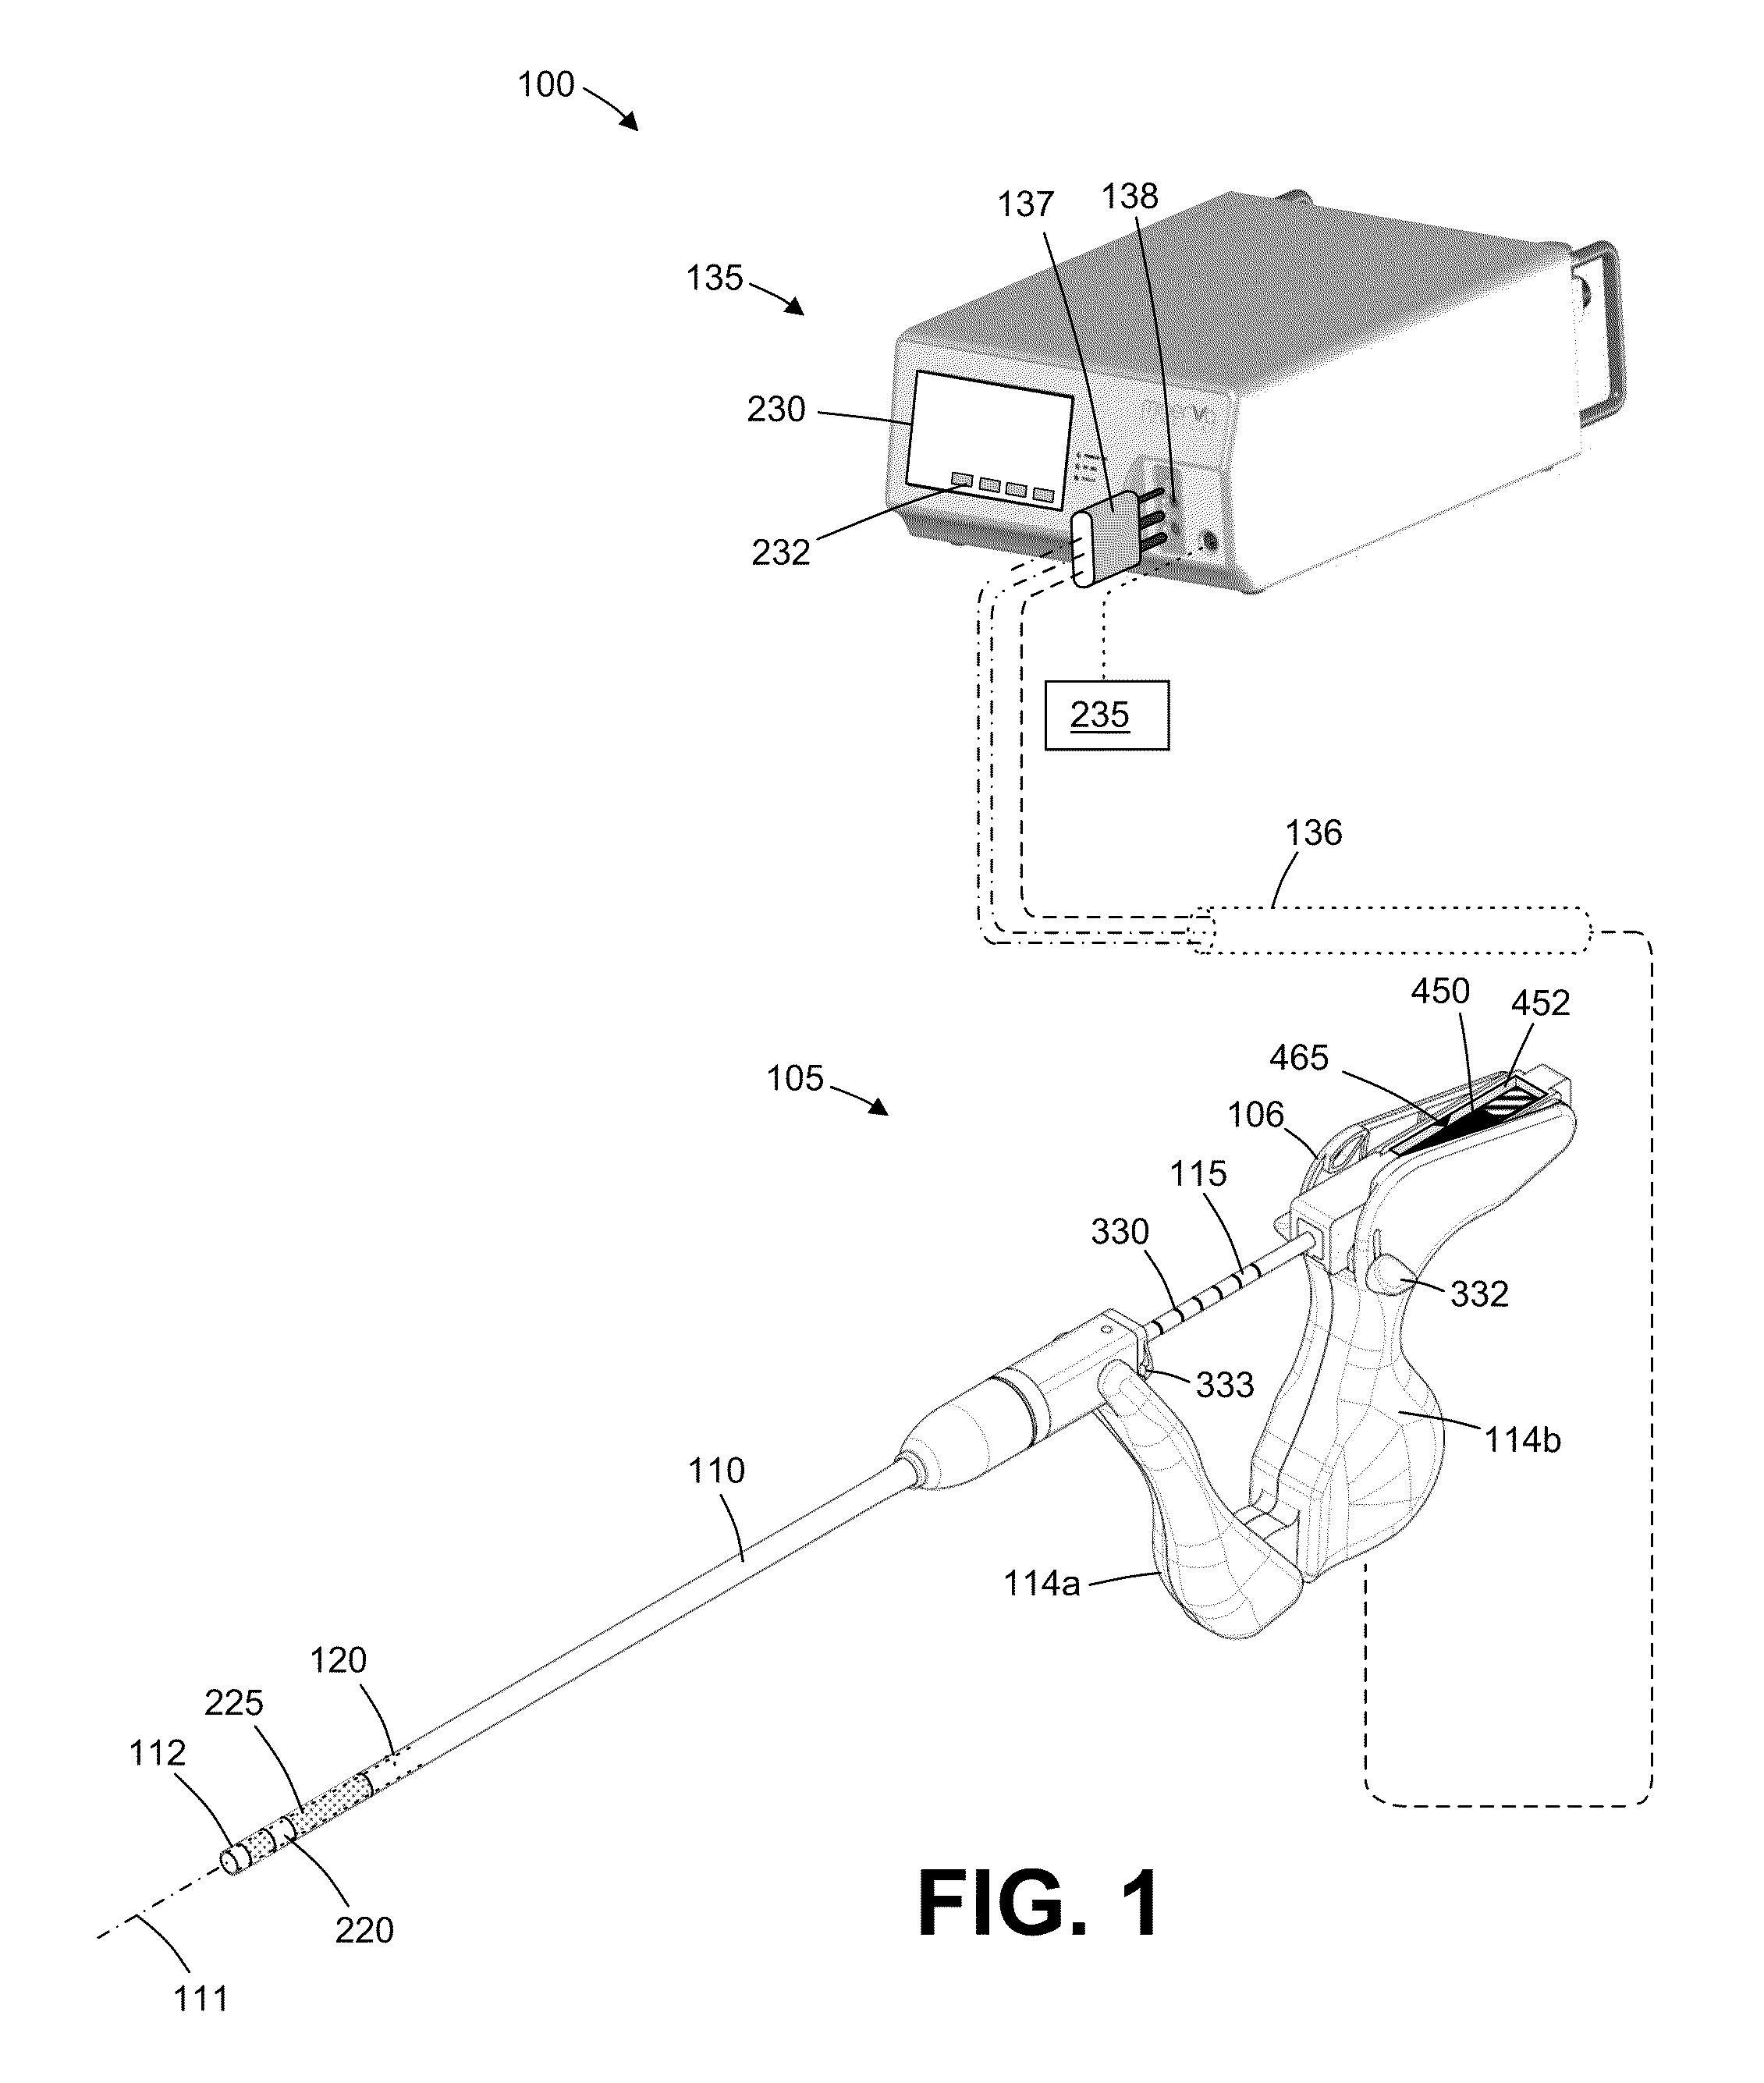 Methods and systems for endometrial ablation utilizing radio frequency